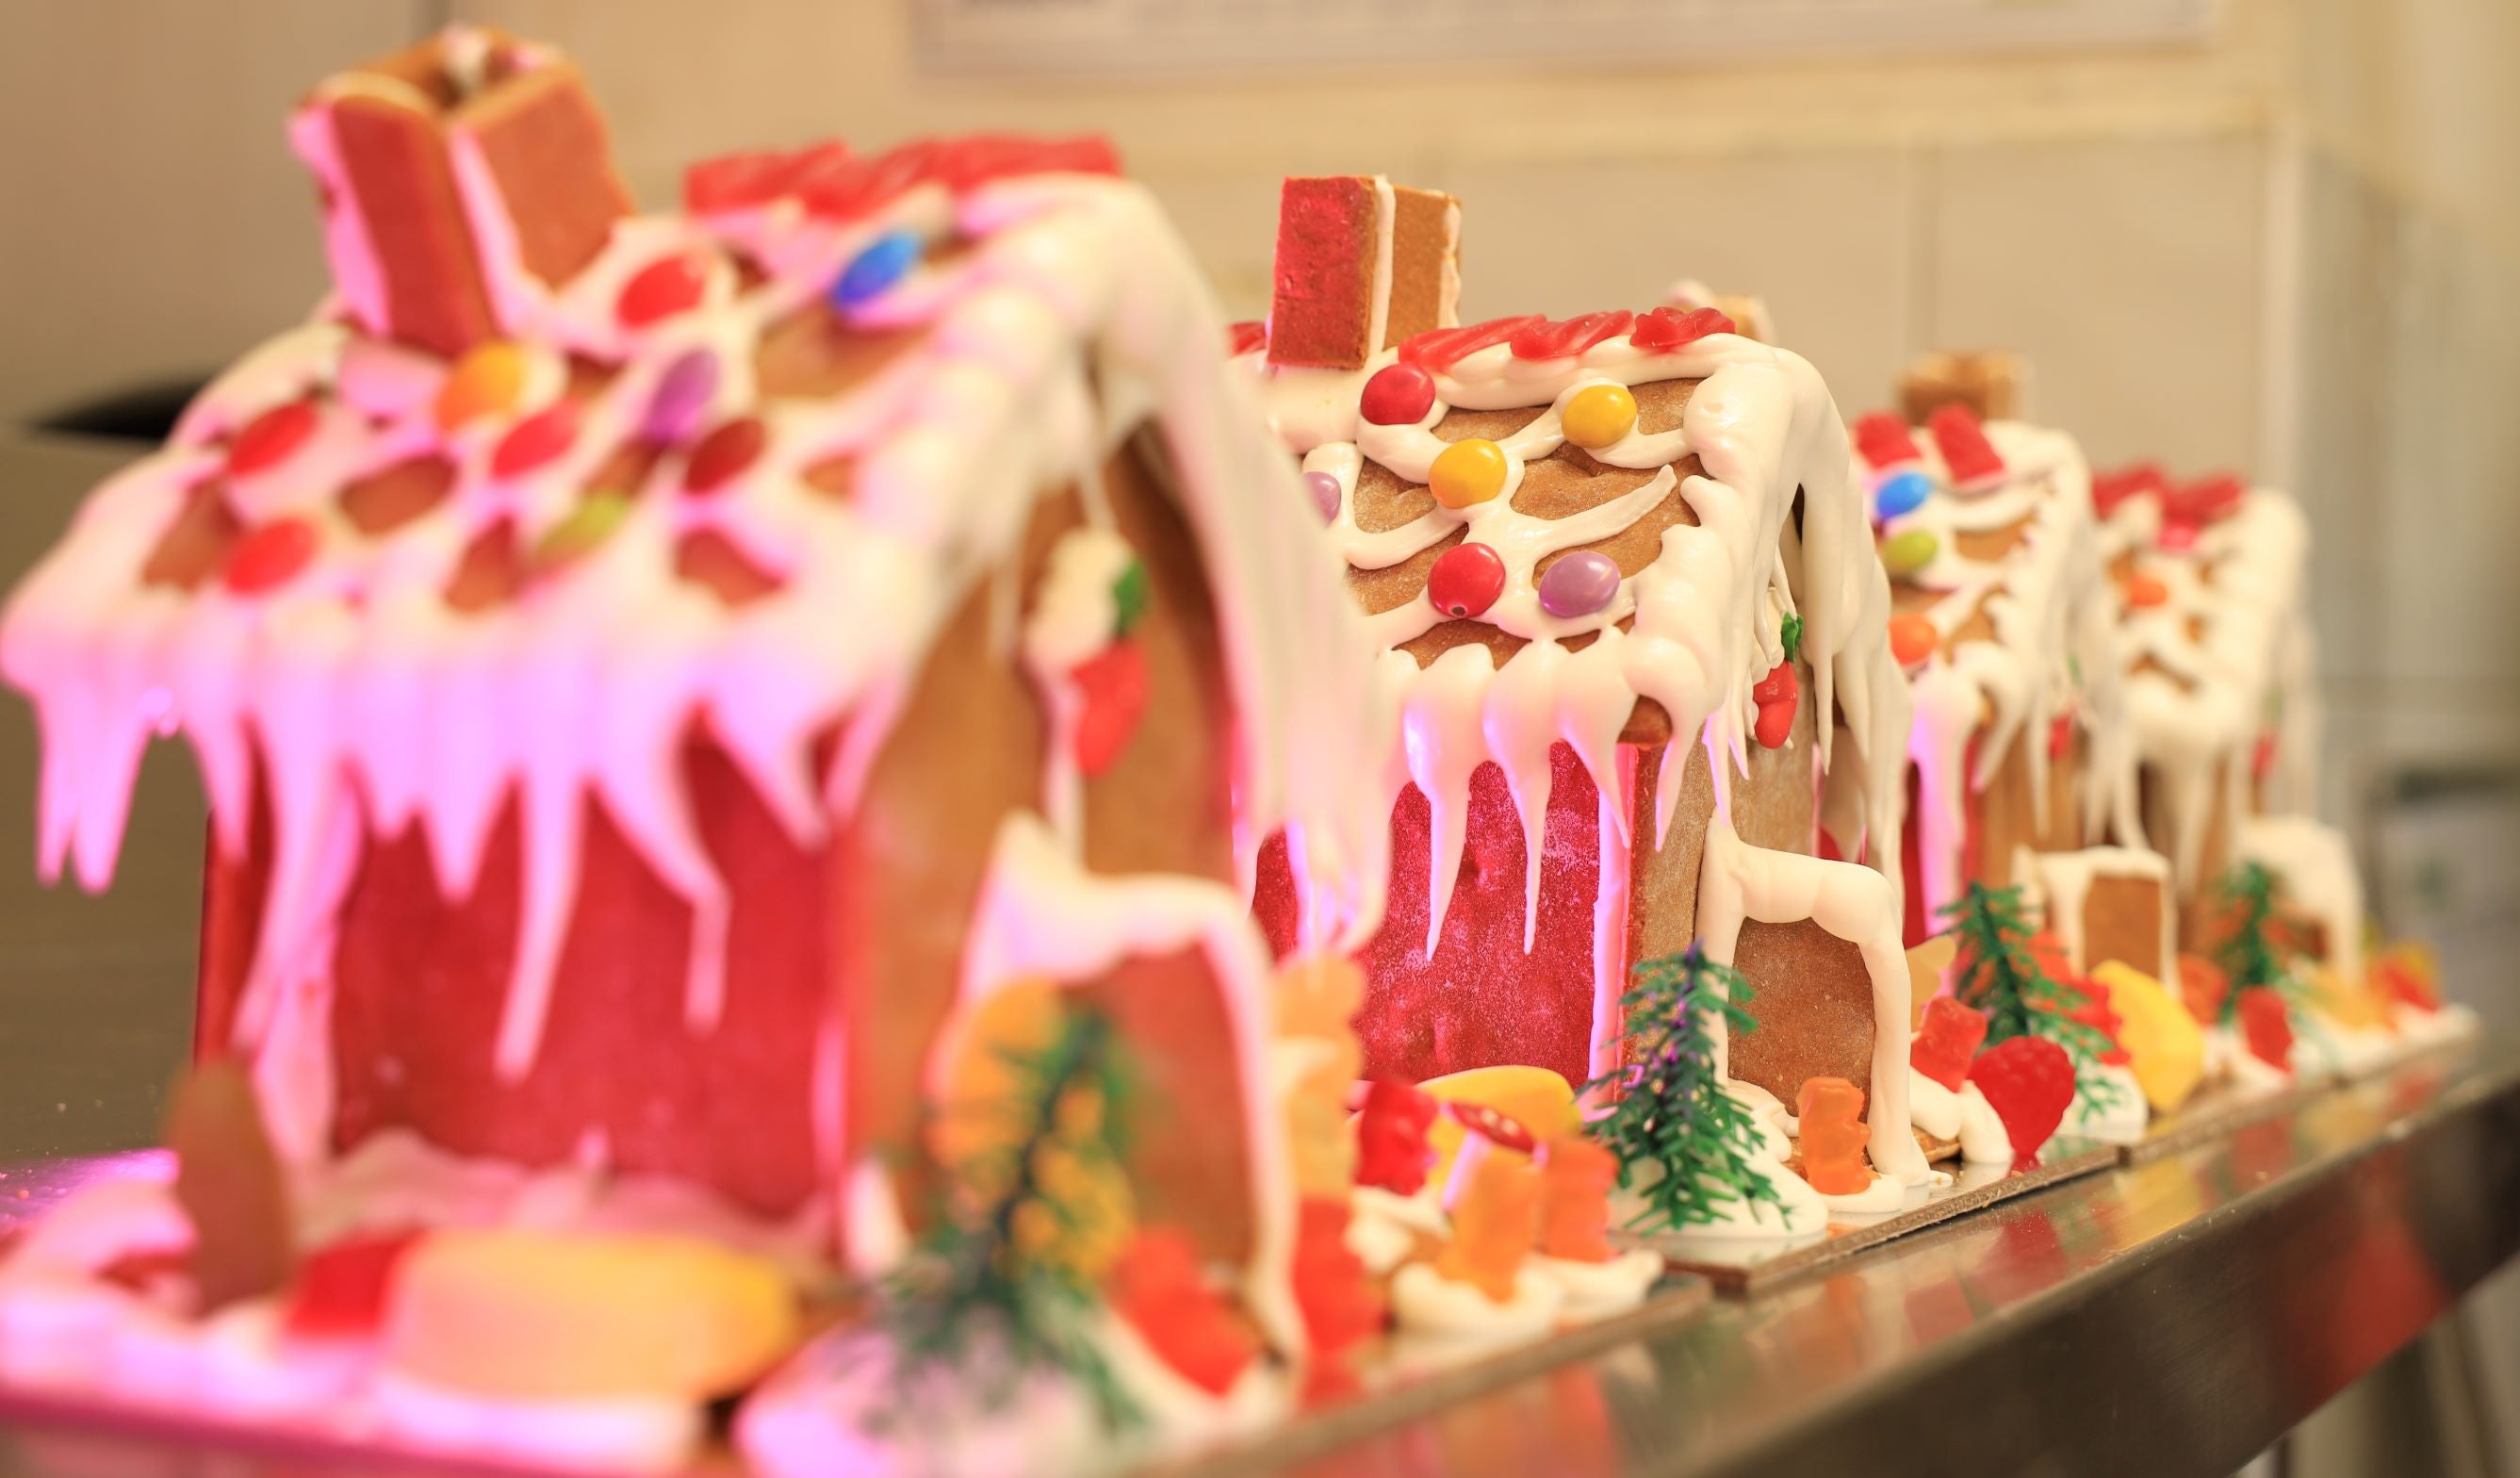 Load video: How to make the gingerbread house